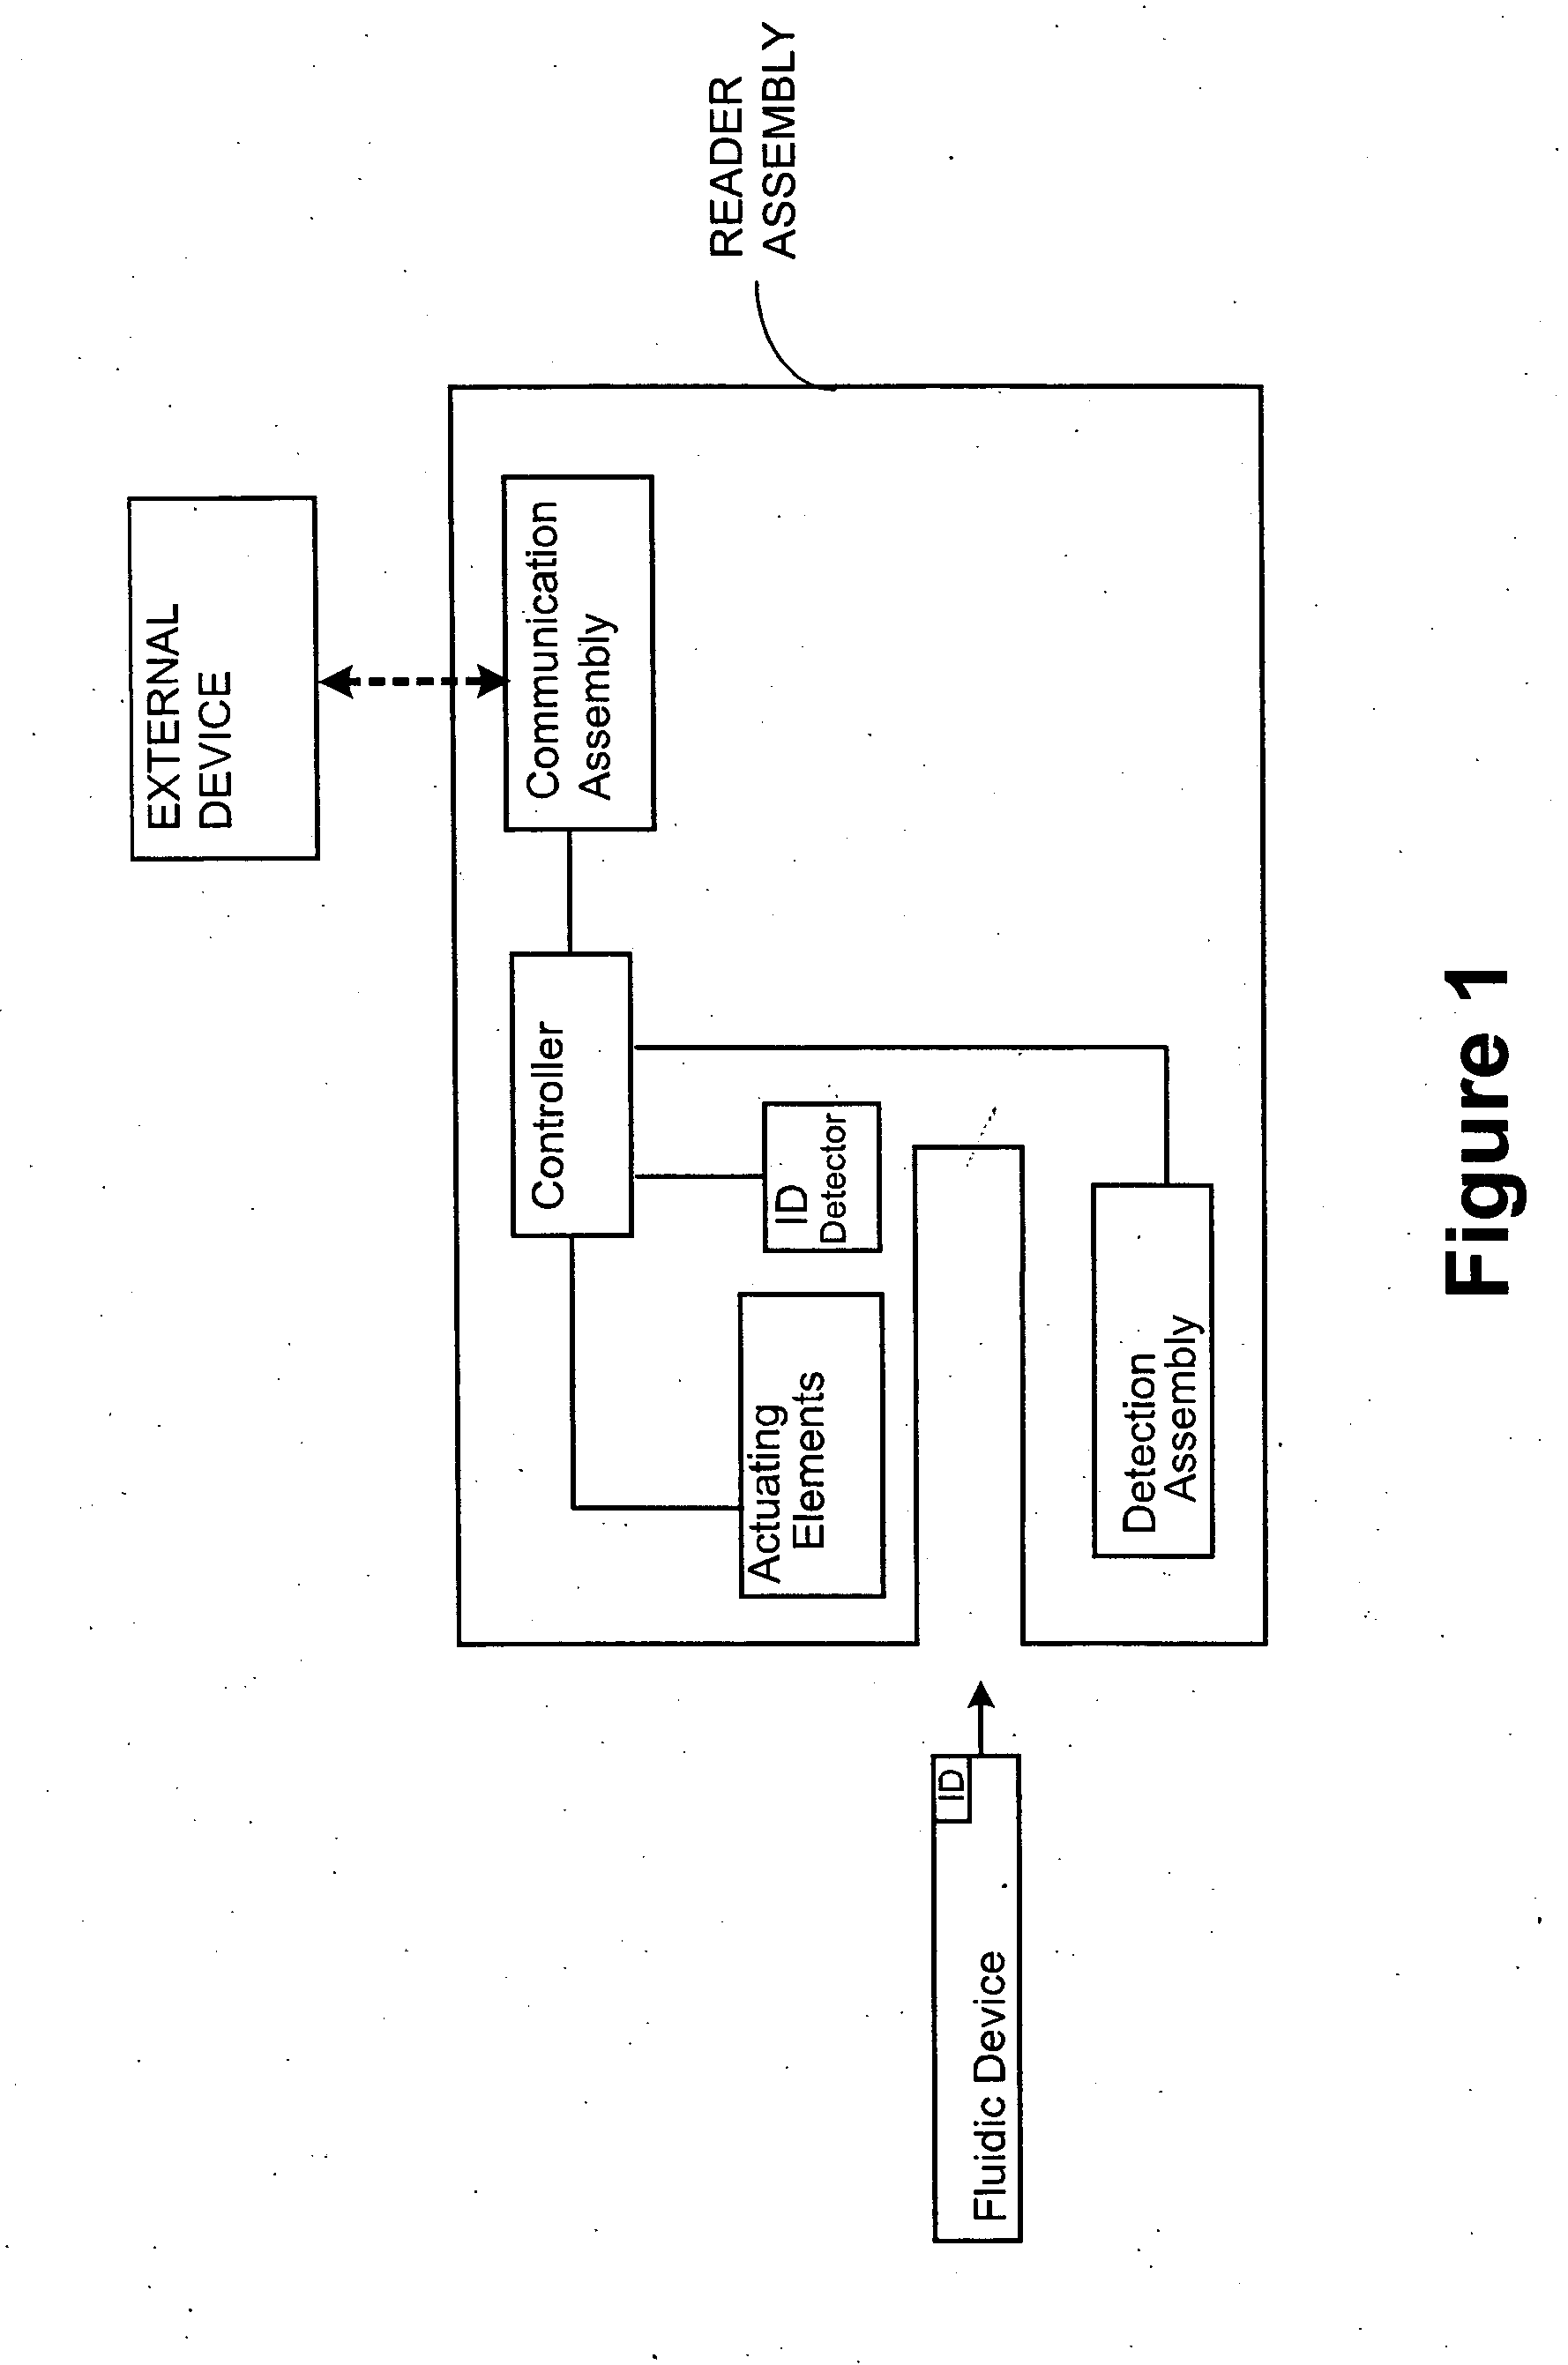 Systems and methods for conducting animal studies